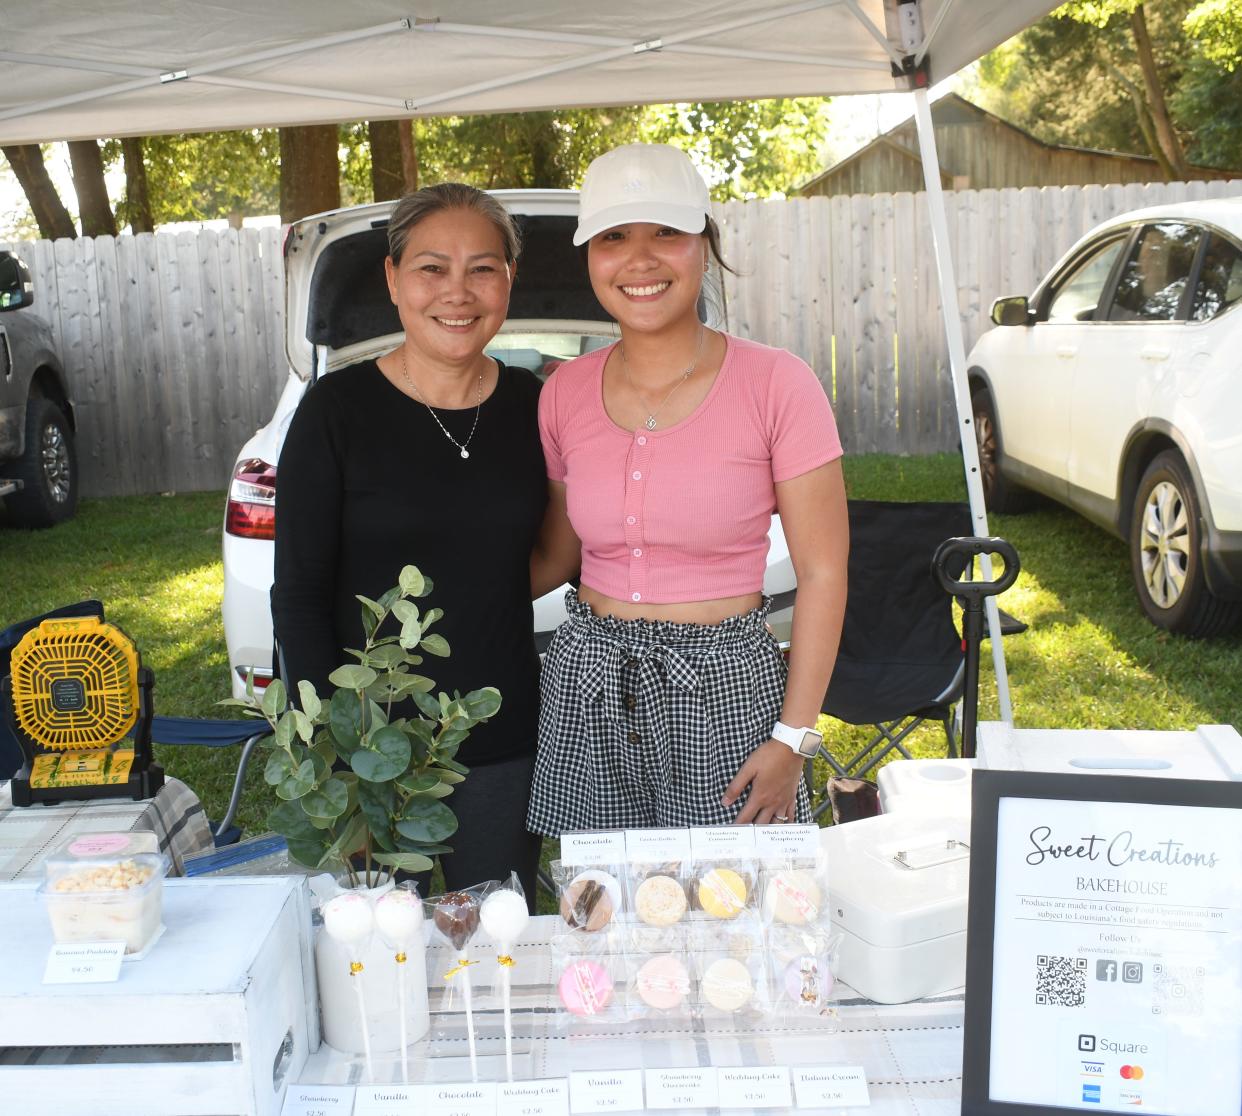 Thi Truong (left) helps her daughter Amy Tra (right), owner of Sweet Creations Bakehouse, sell baked goods. Tra specializes in making macaroons but she also makes cake pops, chocolates chip cookies, custom cakes, cupcakes and other desserts.